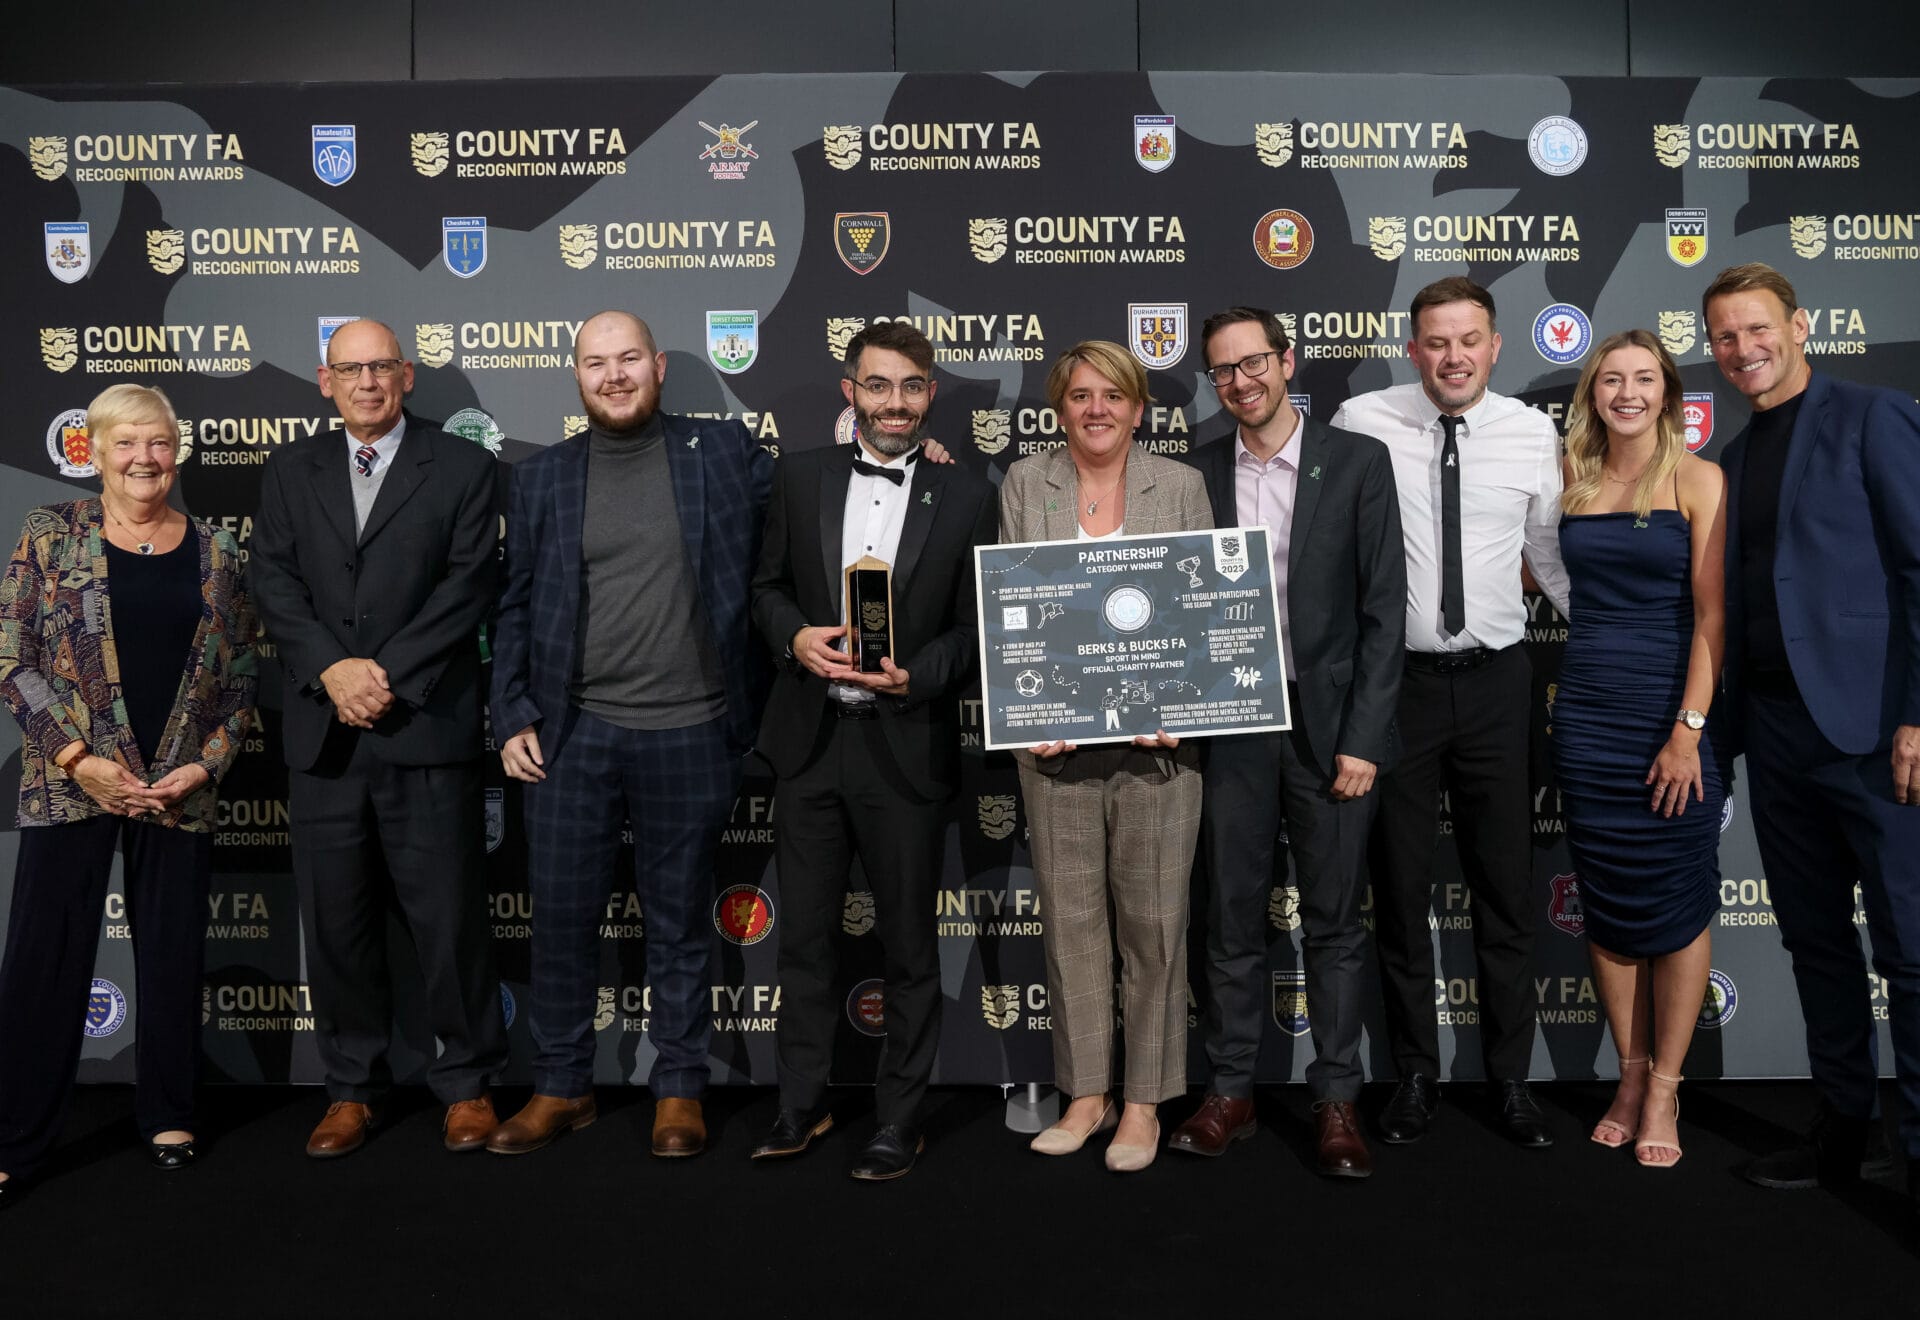 Pictured at the Awards are Sue Hough MBE, John Horsley BBFA director, BBFA staff Hans Cook, Rod Noble, Liz Verrall, Alastair Kay, Richard Brant, Kelly Sutton and Teddy Sheringham. Credit: Getty Images / Berks & Bucks FA.